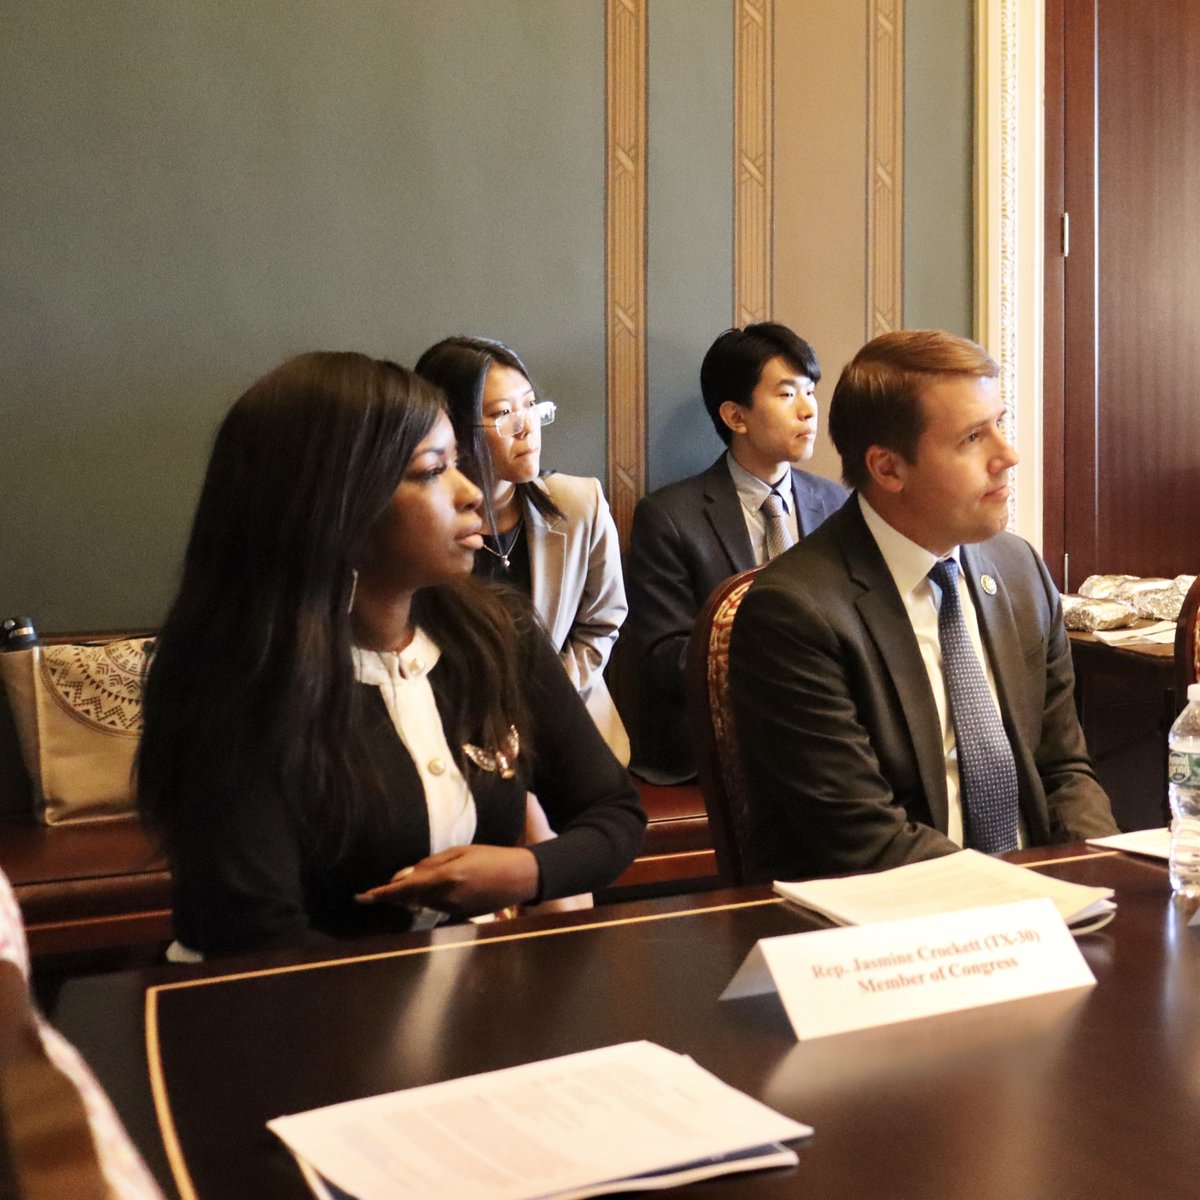 Student debt should not be a roadblock to economic success for younger Americans. This week, Future Forum members heard from @usedgov, @nasfaa, and @TICAS_org on how we can ensure that everyone can get access to the education and skills they need to succeed.